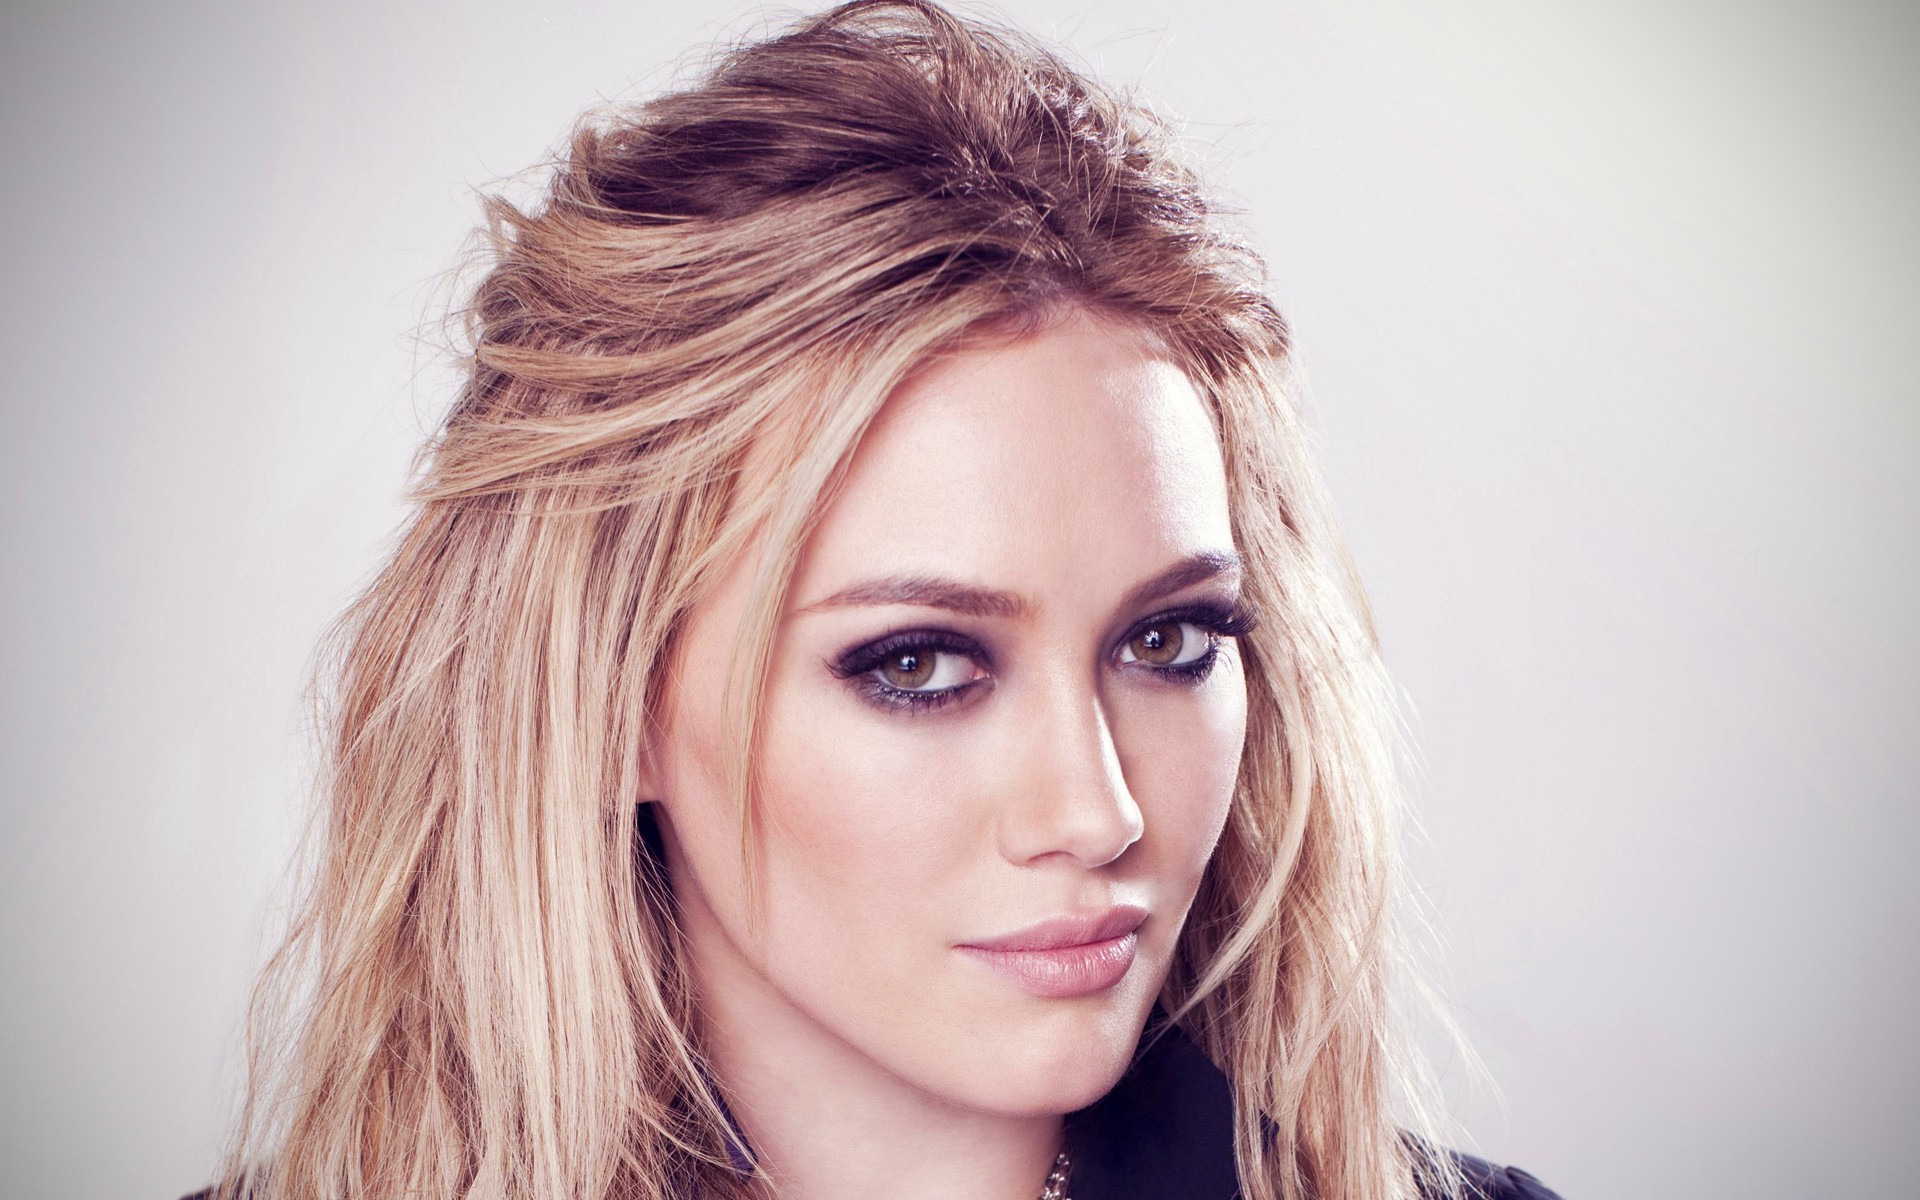 Hilary Duff, a well-known celebrity, graces this captivating desktop wallpaper.